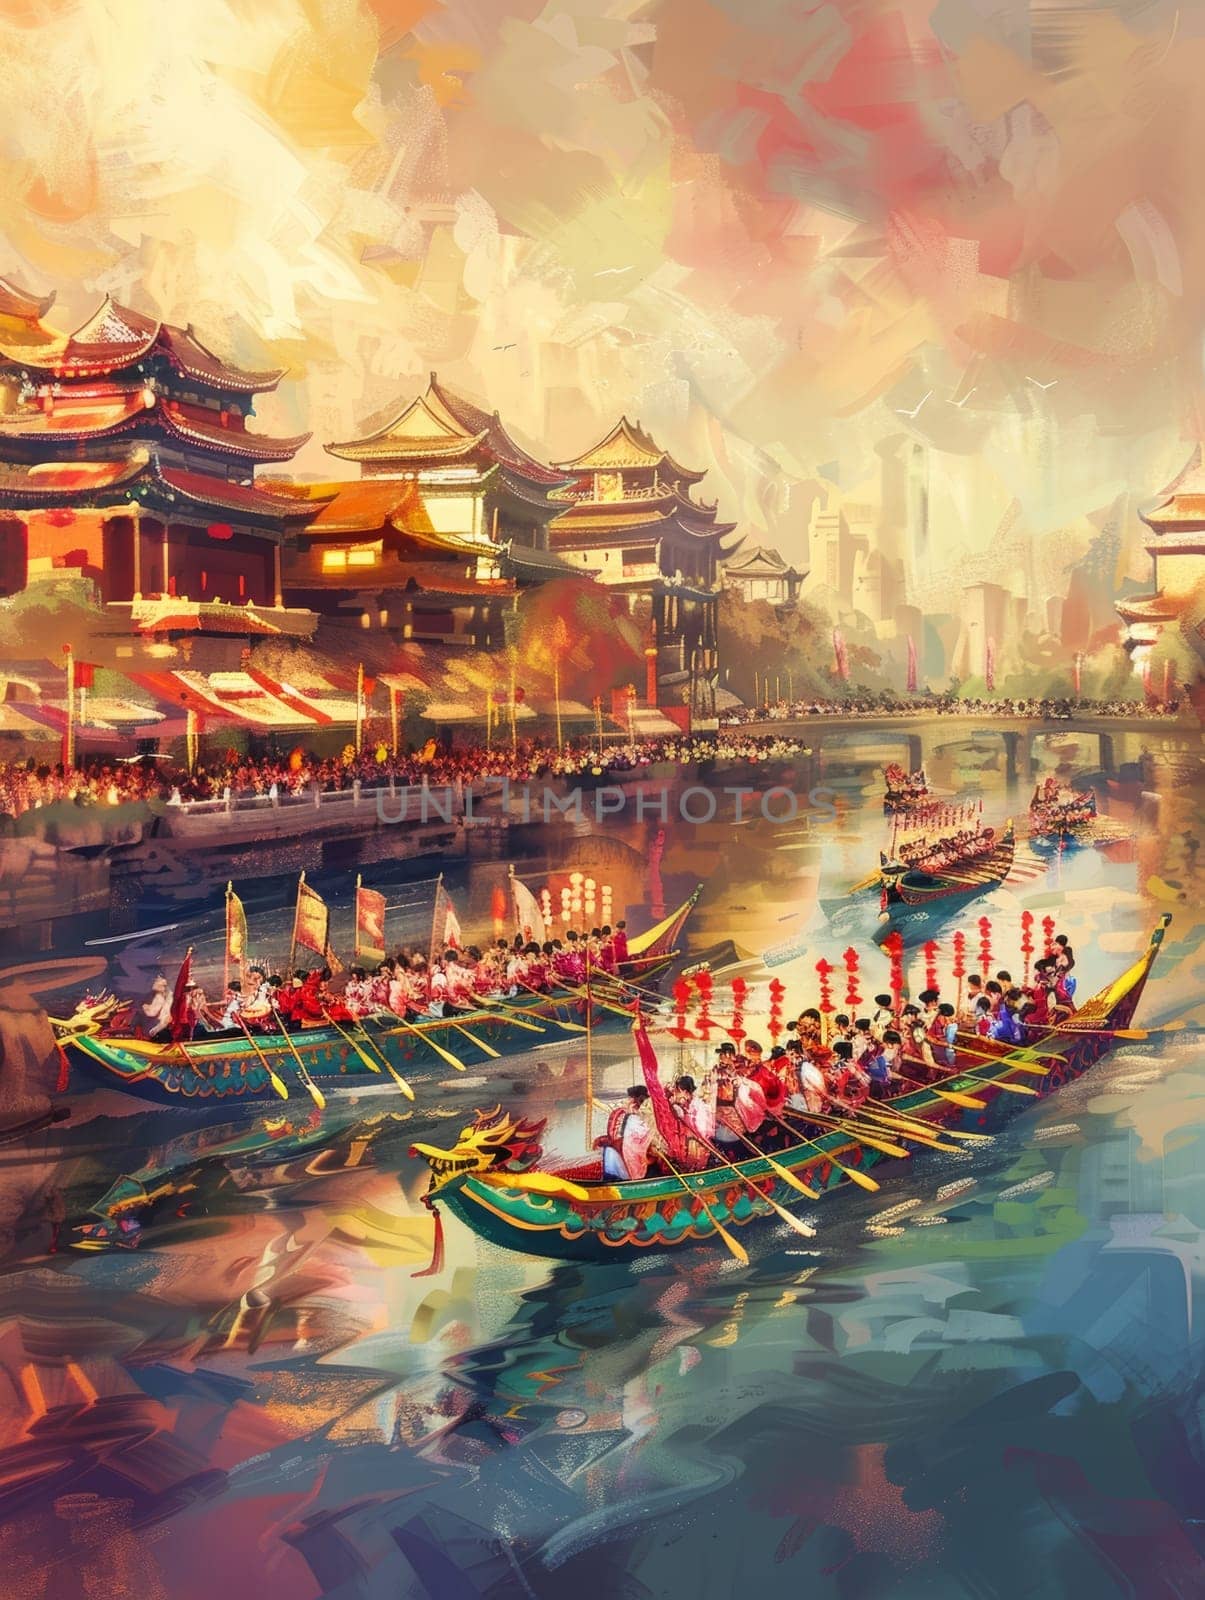 Ethereal light bathes dragon boats and traditional pagodas during a festival, highlighting a harmonious blend of culture and spirited festivity